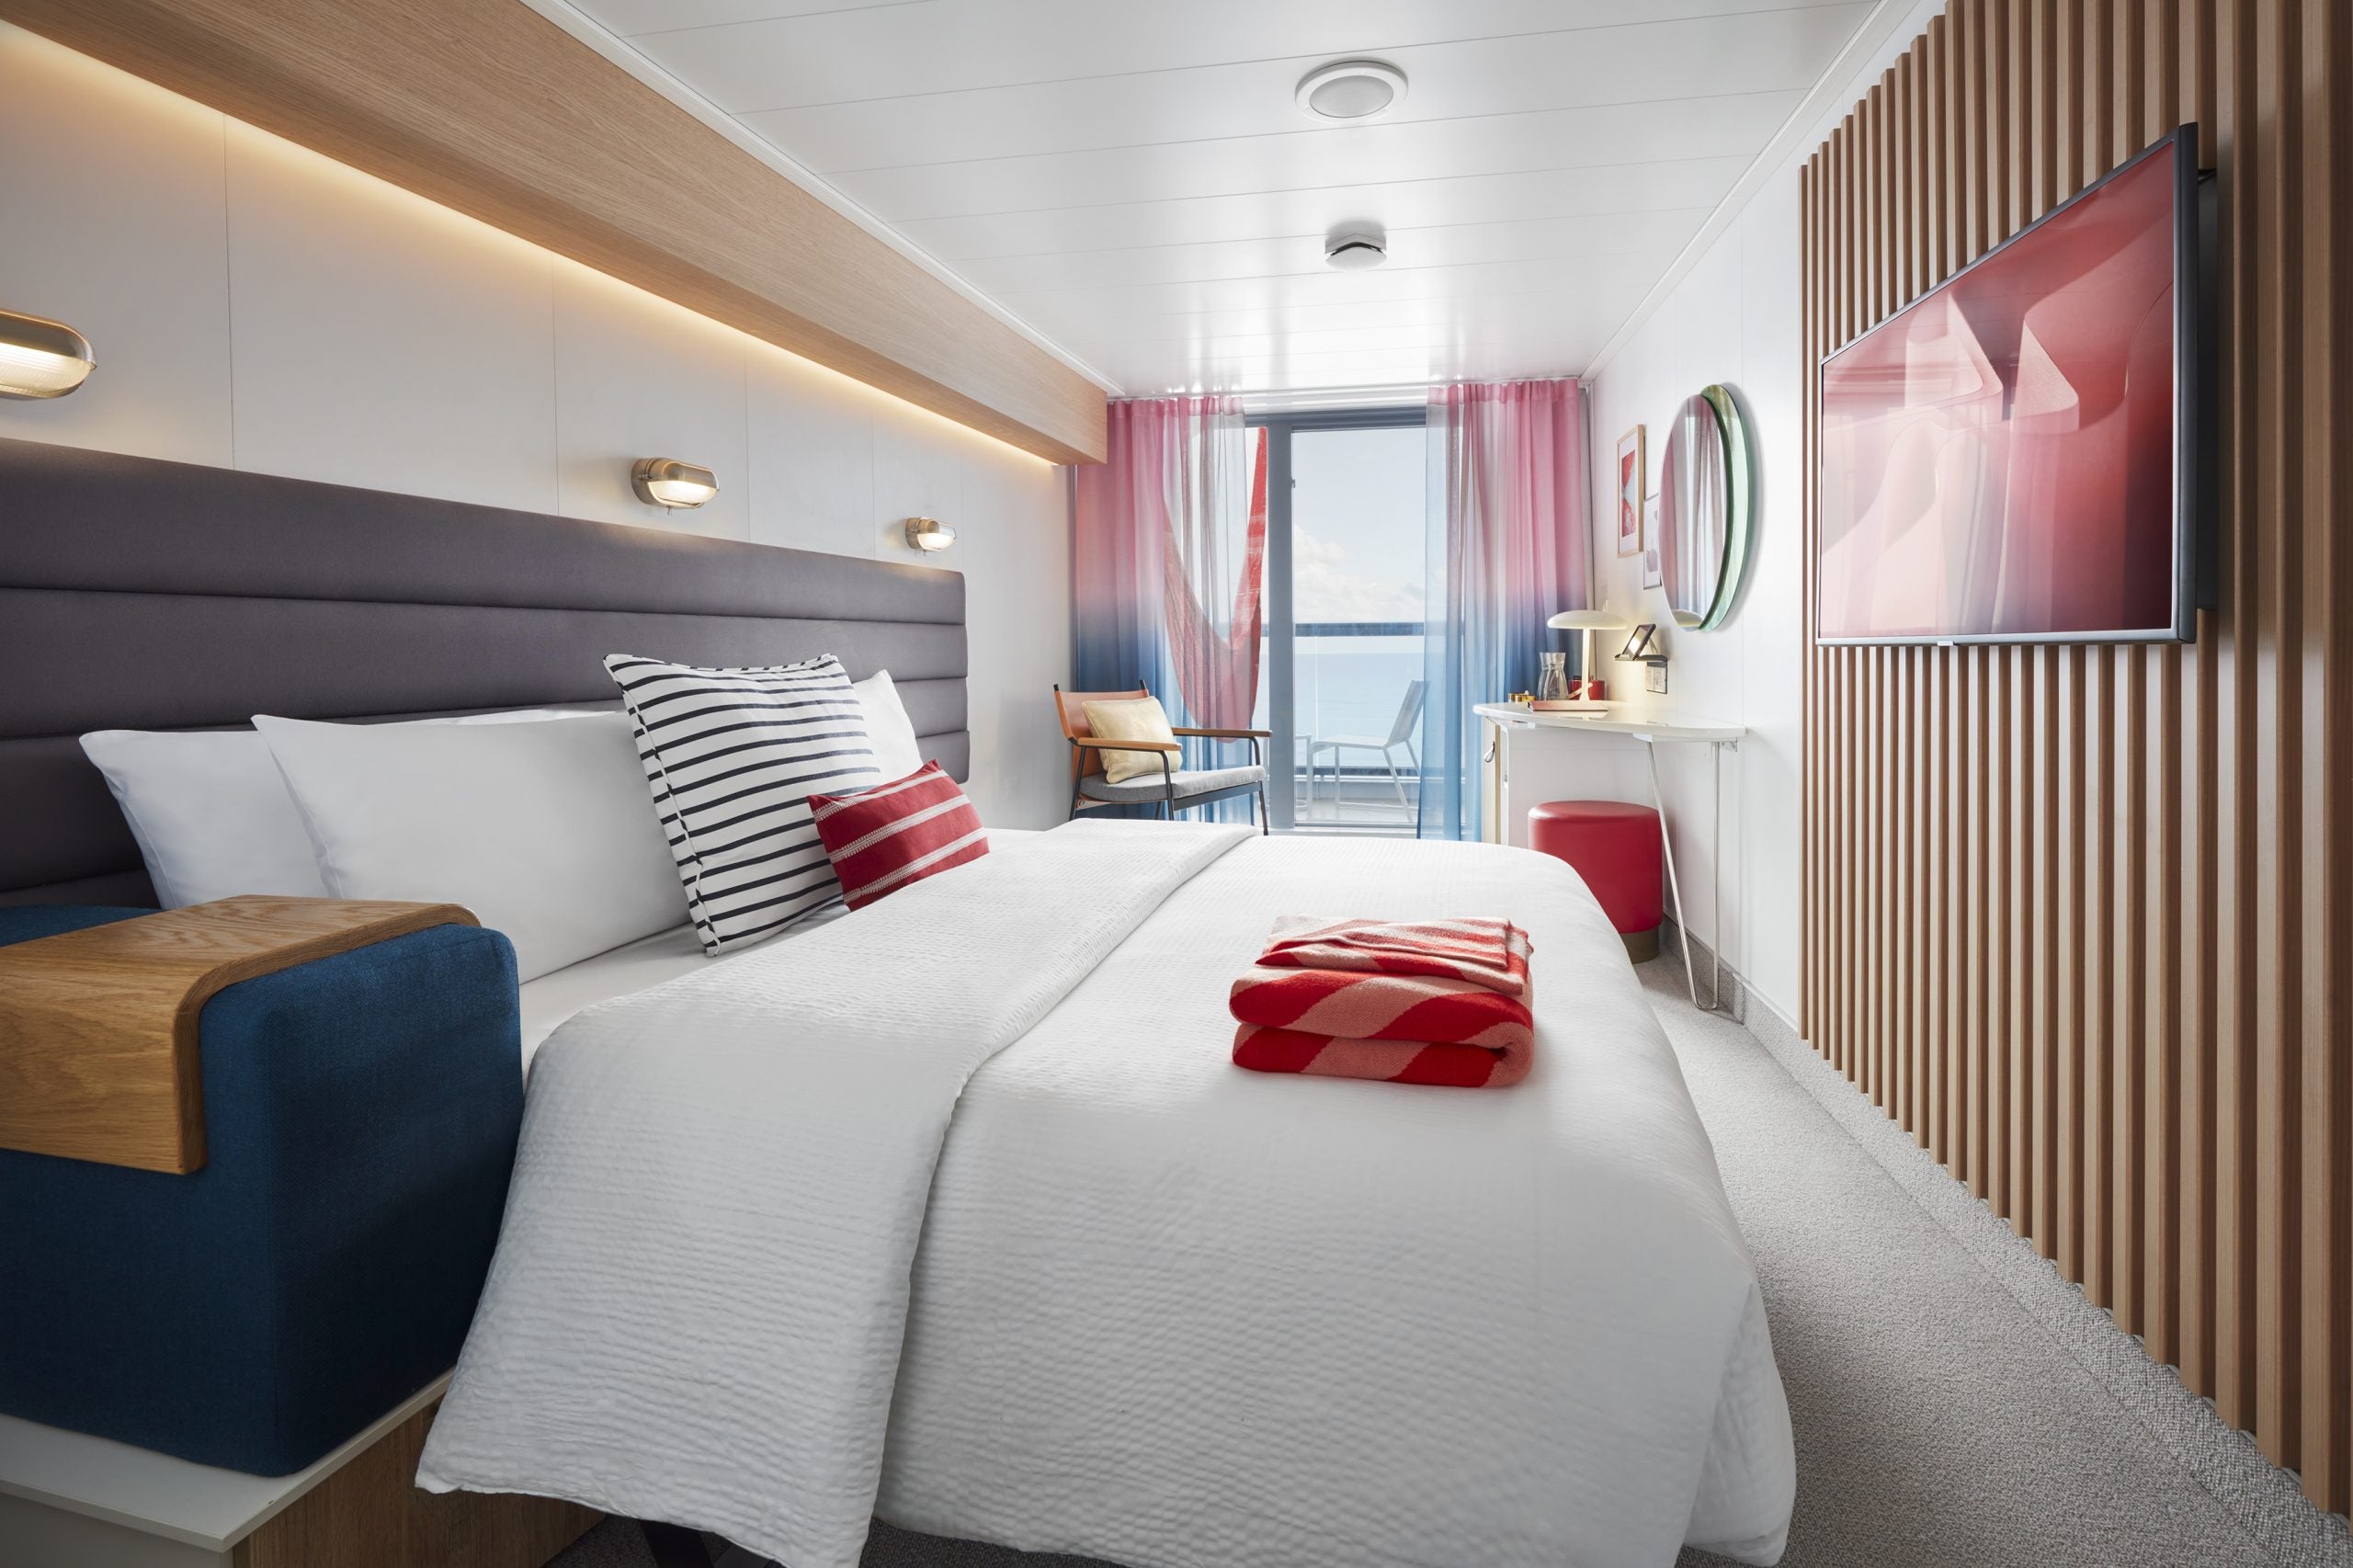 Not Your Grandma’s Cruise Line! Virgin Voyages Is Here To Redefine The Luxury Cruise Experience